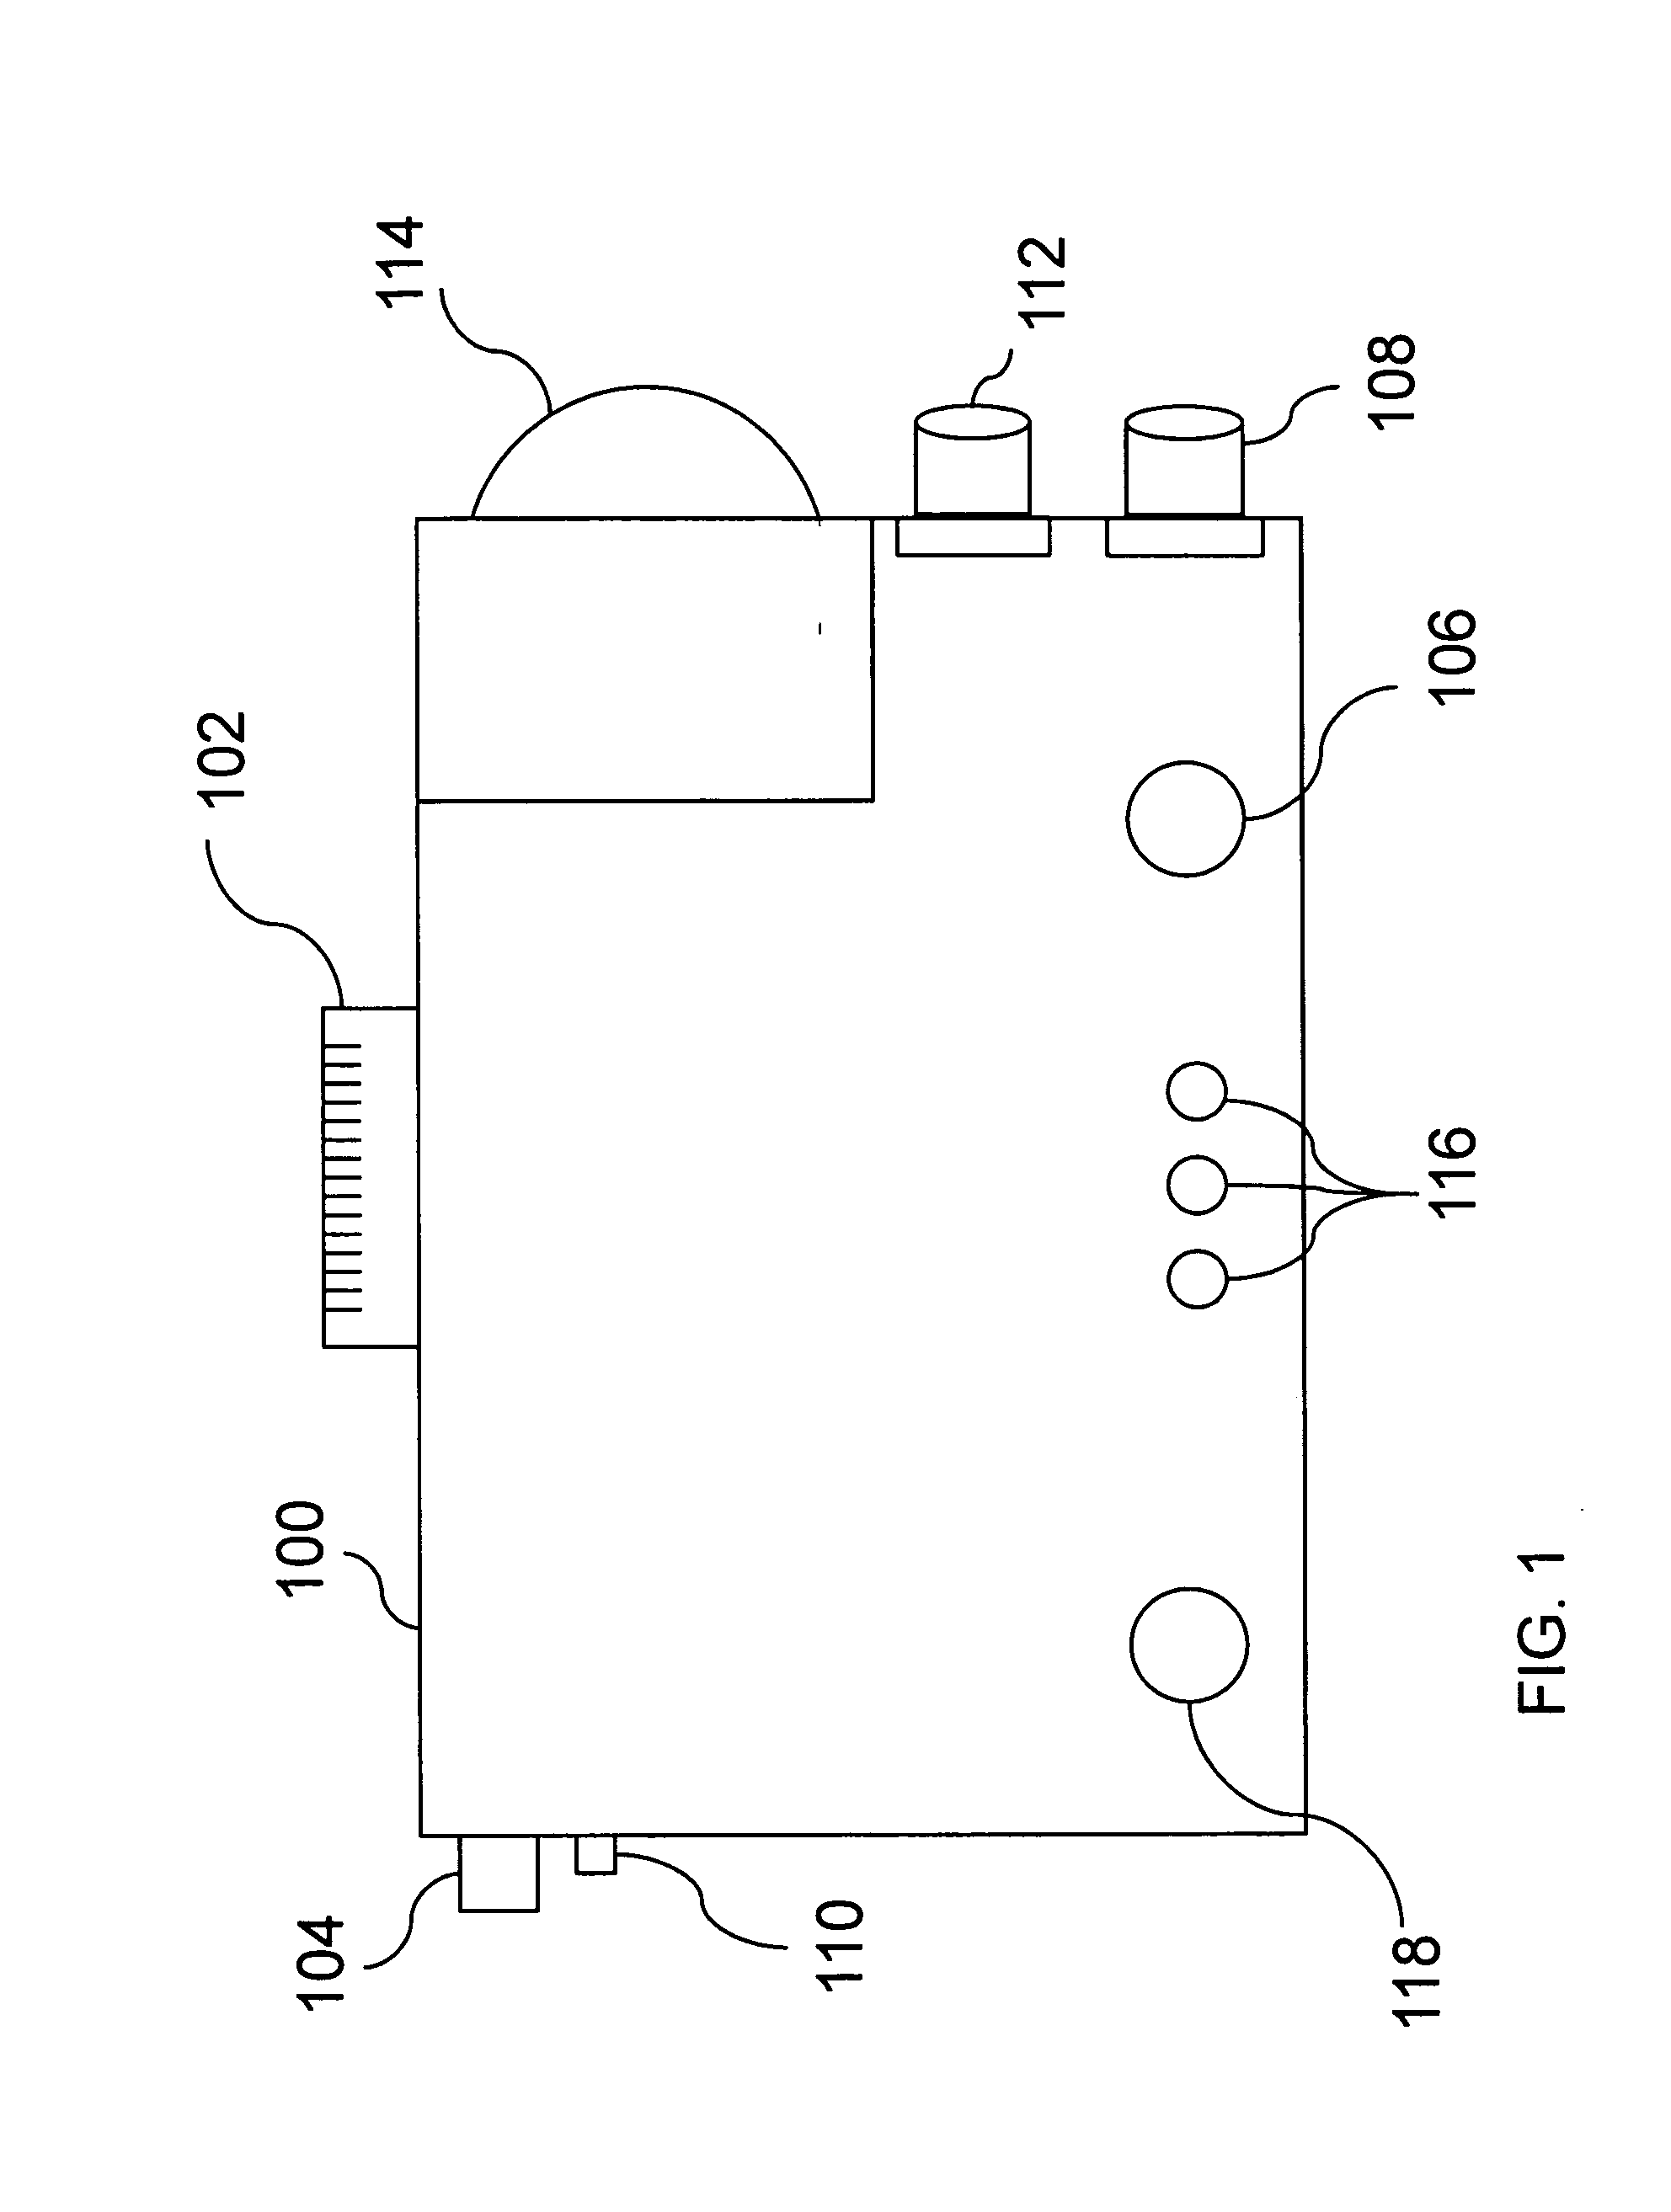 Portable device and associated software to enable voice-controlled navigation of a digital audio player